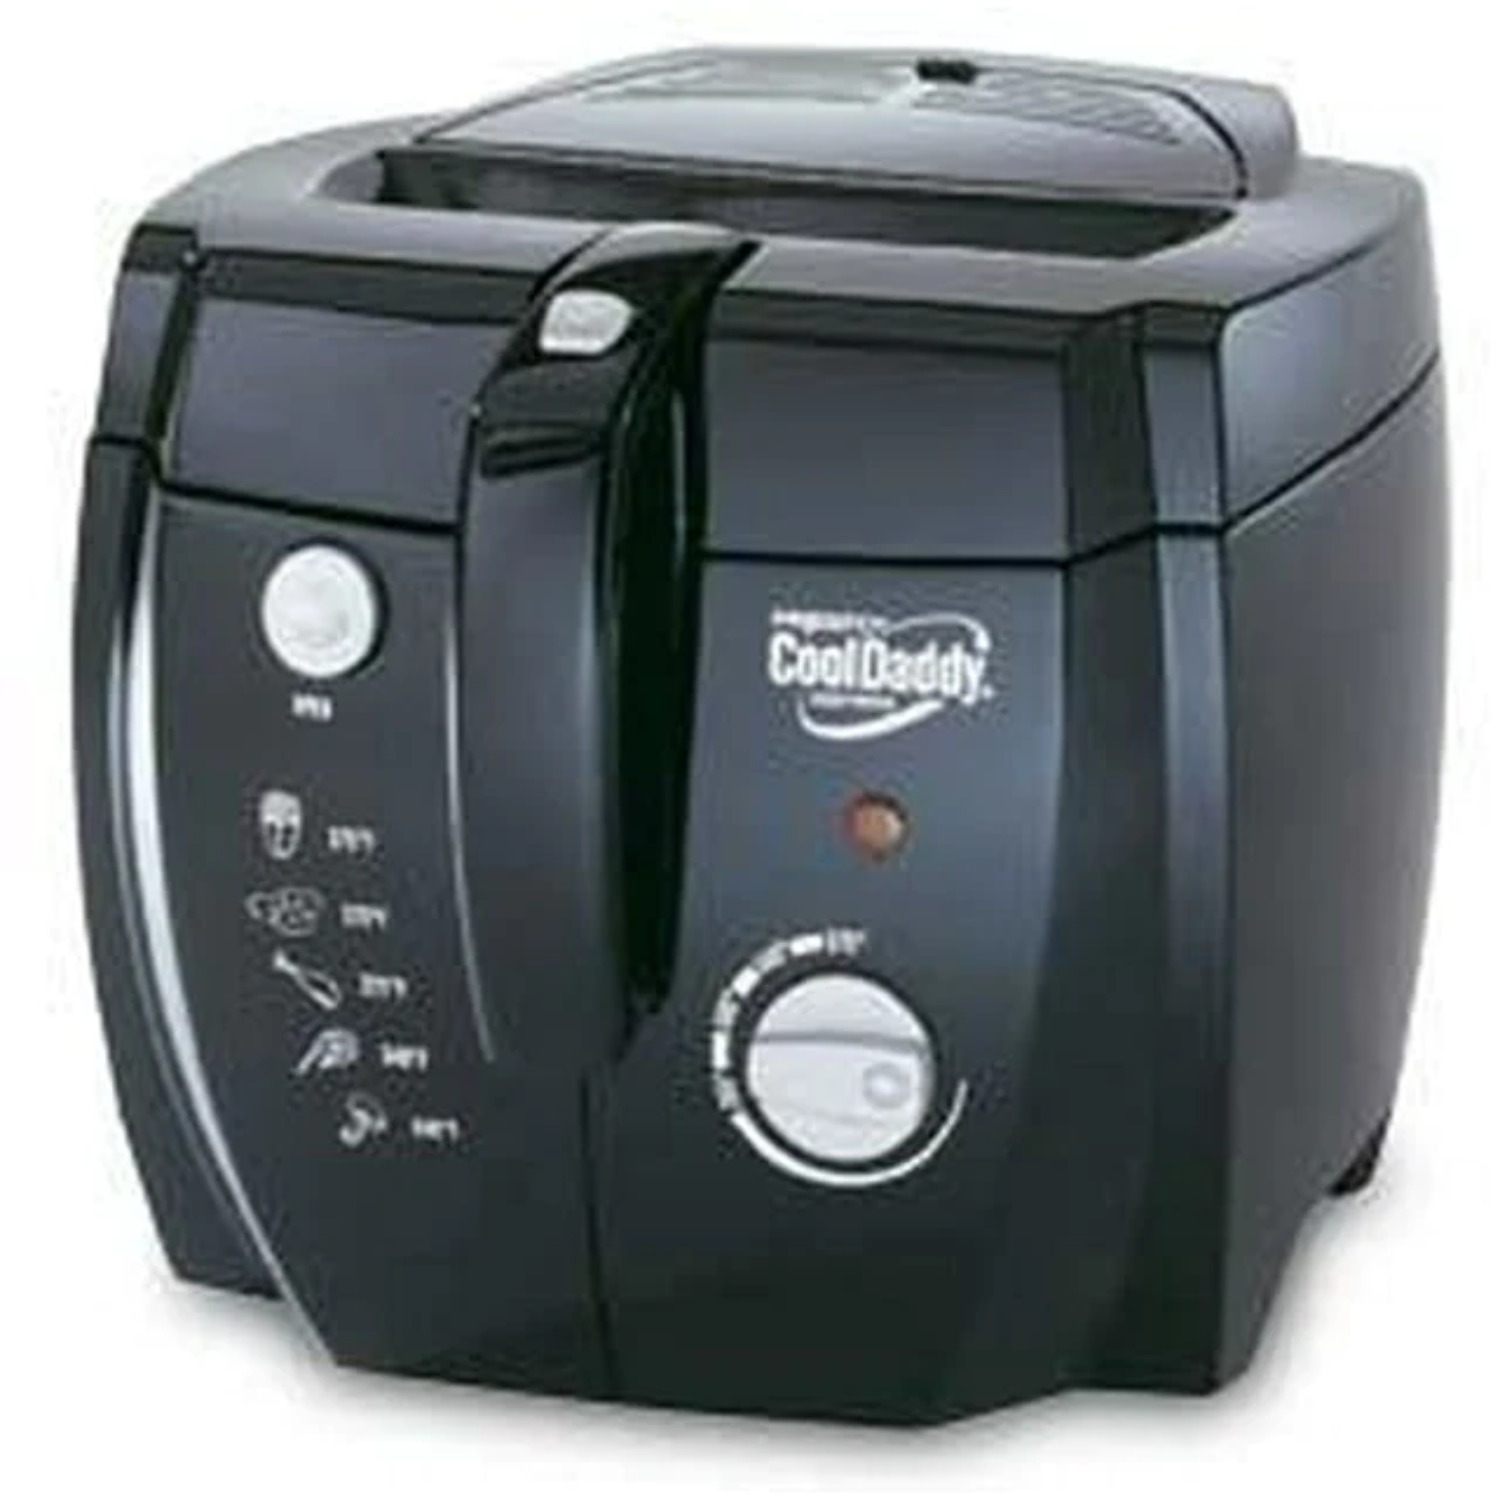 Presto Cool Daddy Cool-Touch Deep Fryer 05442, Black - image 1 of 4